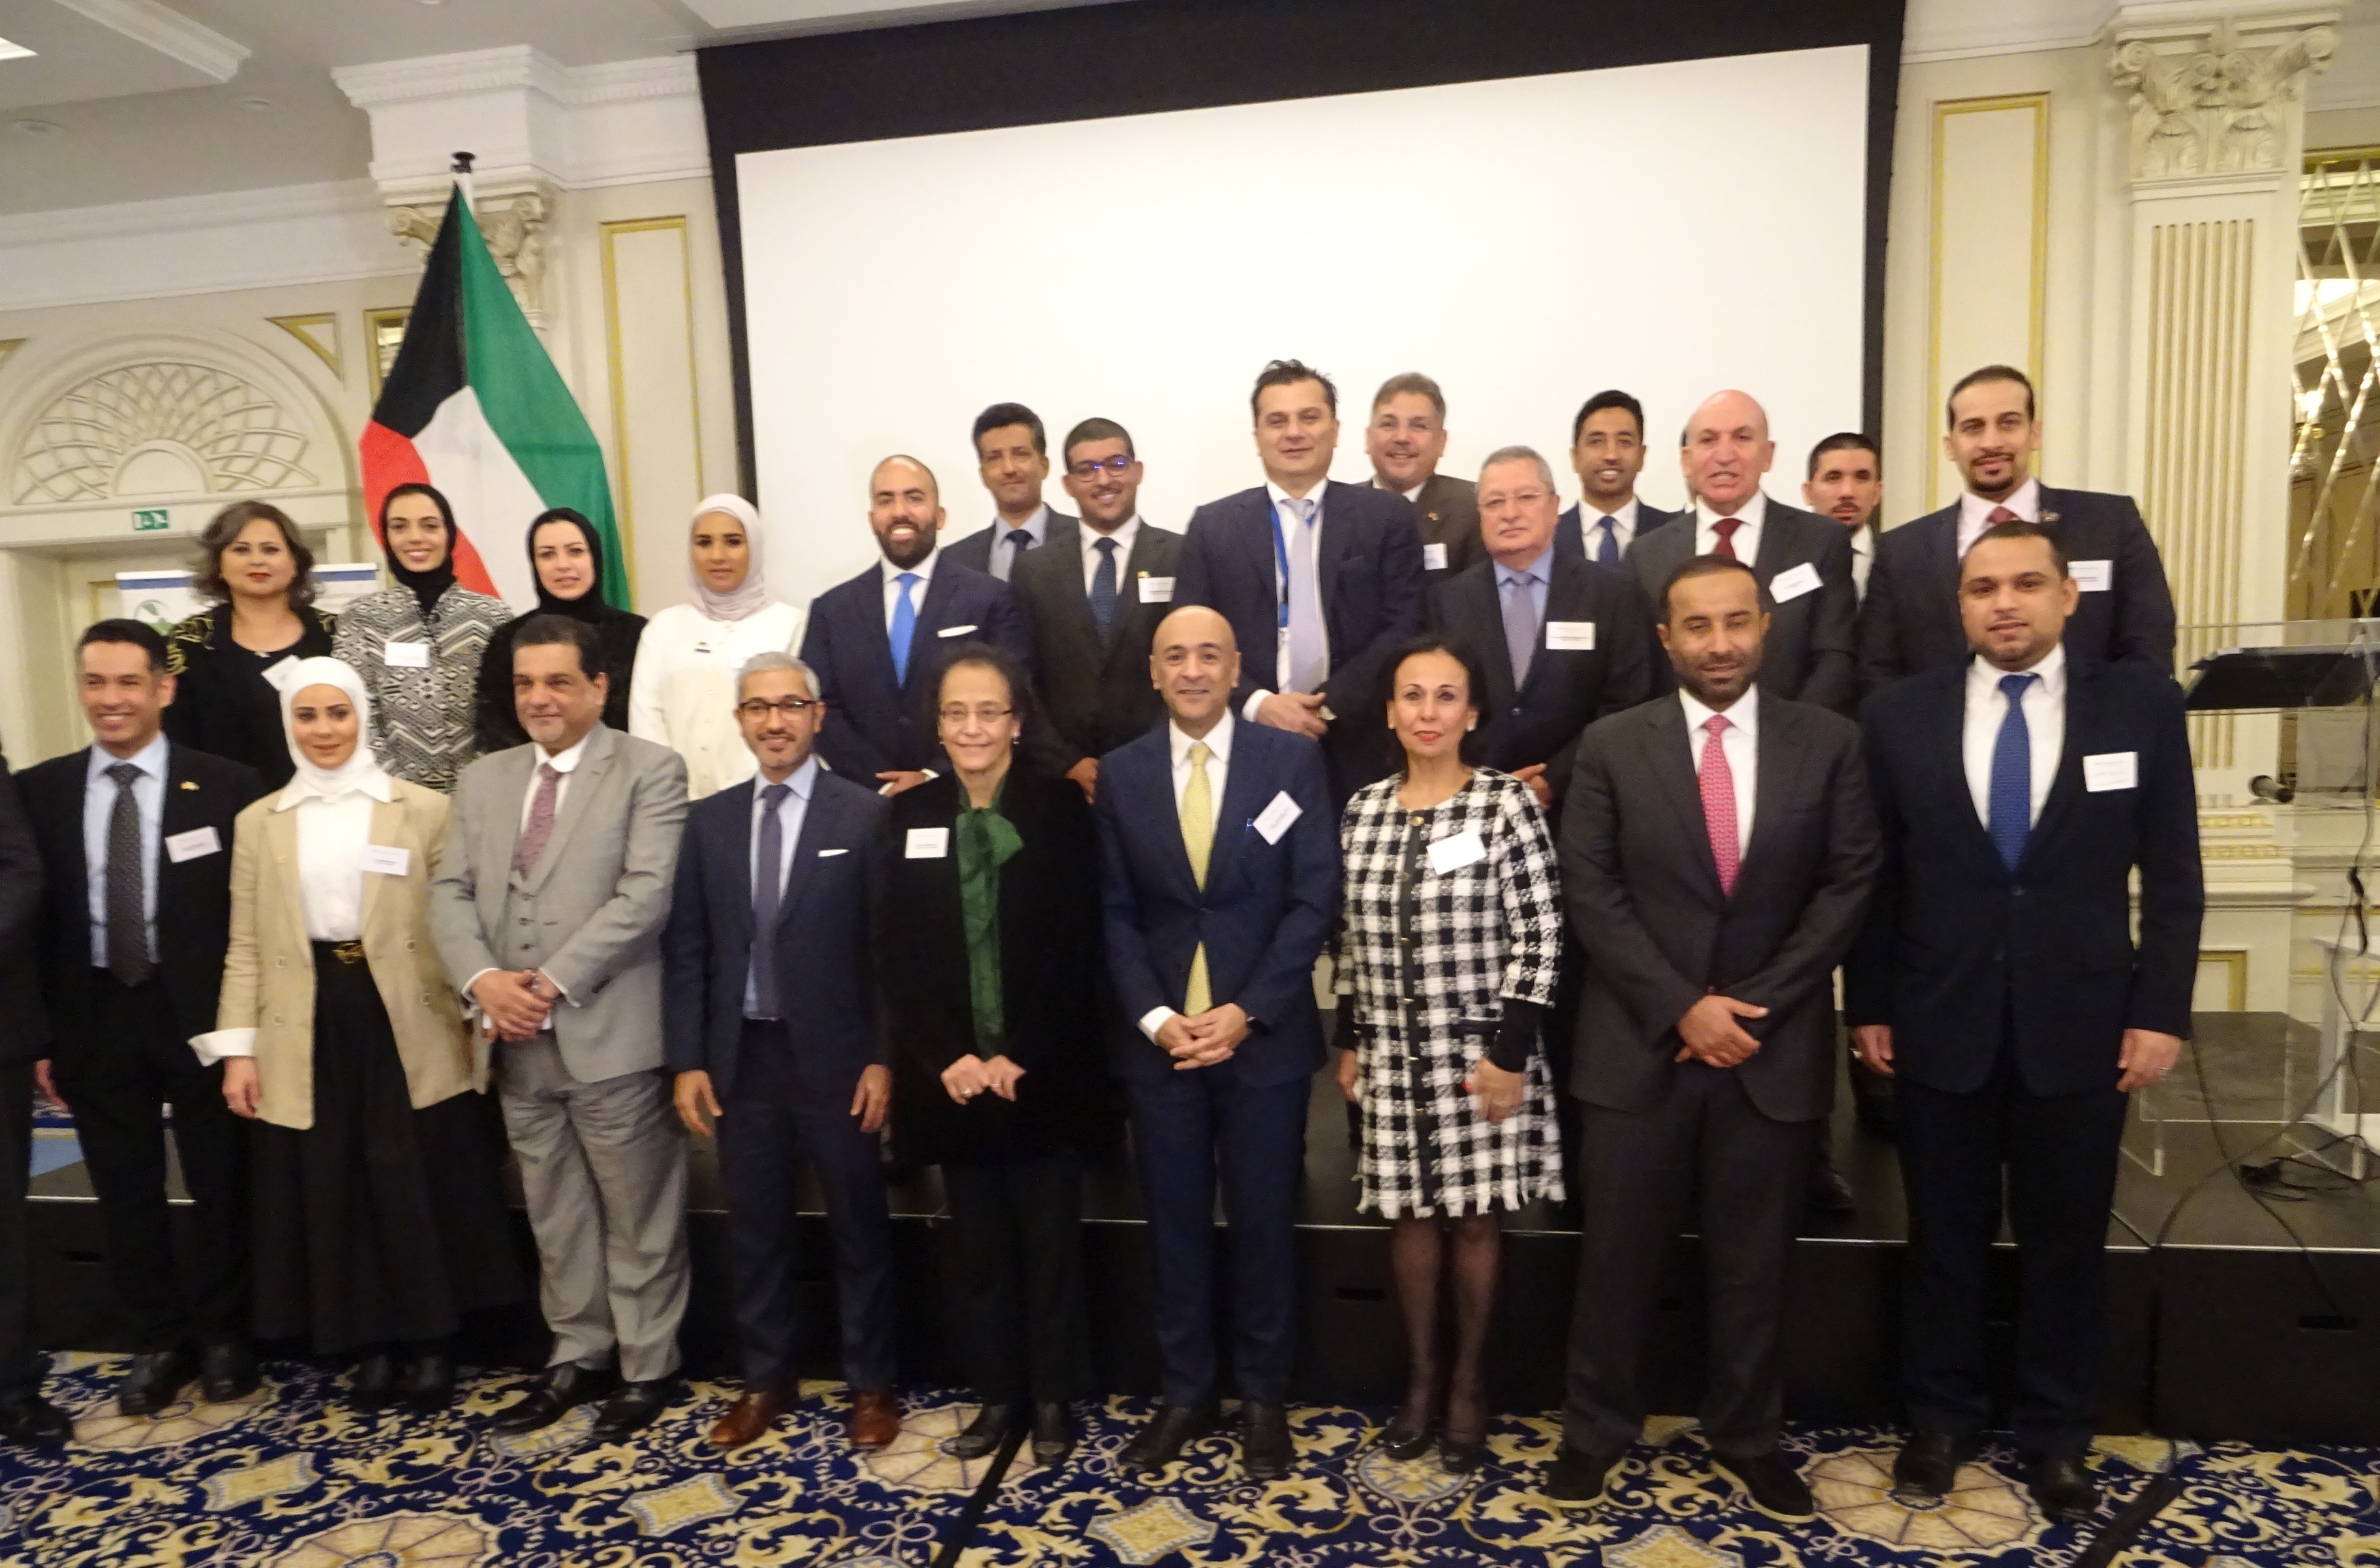 Representatives from major Kuwaiti government institutions at the Forum